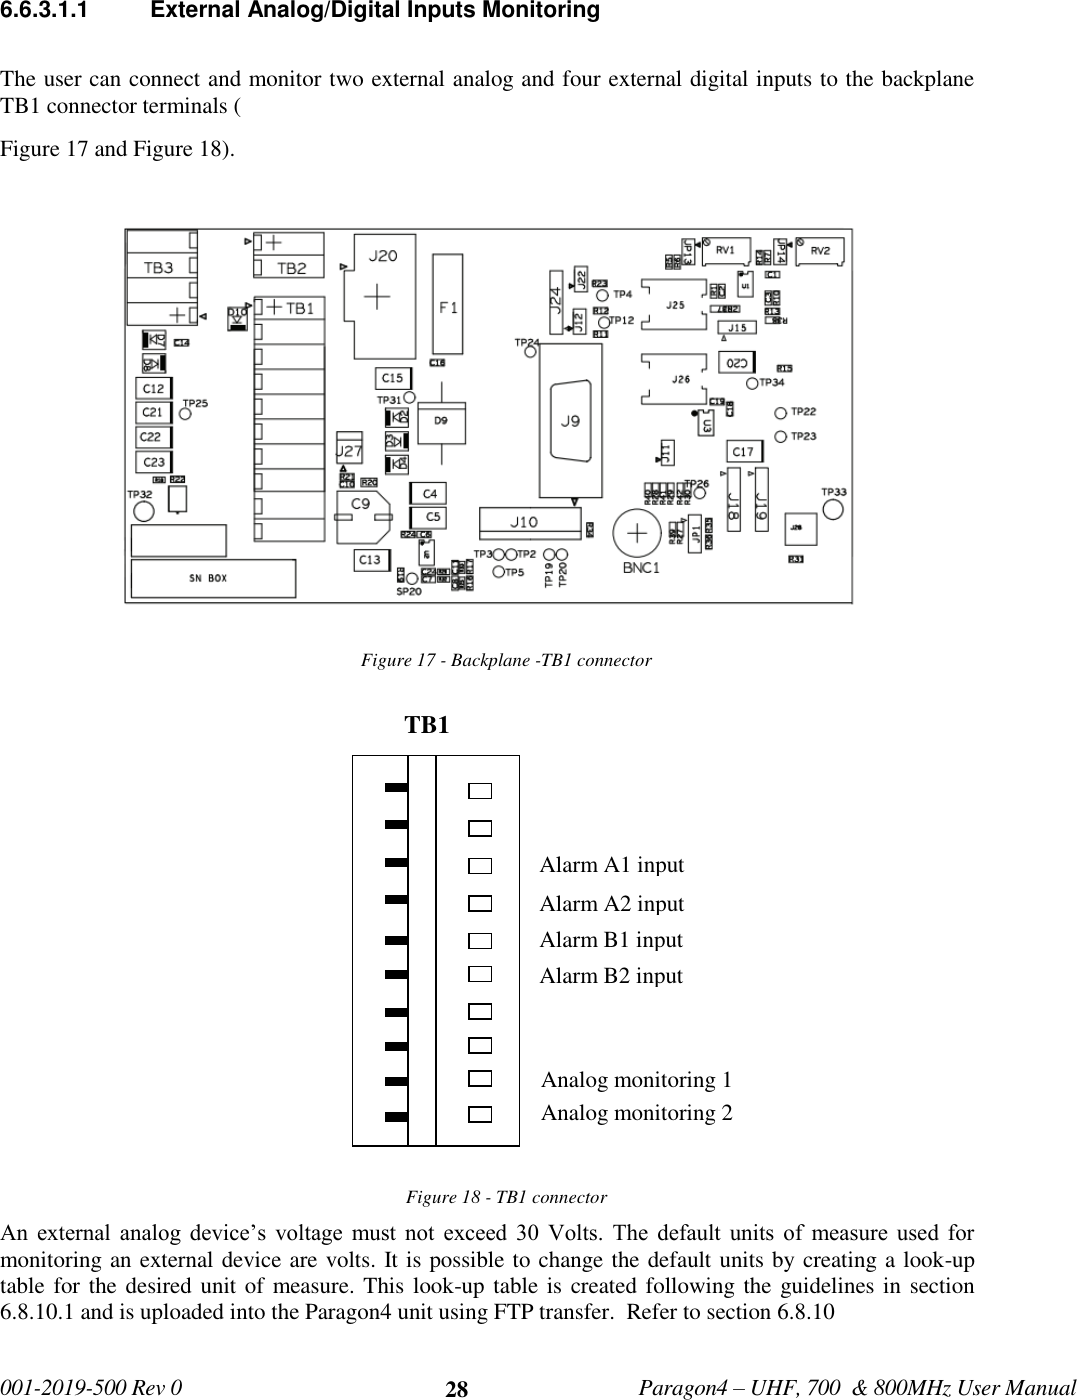   001-2019-500 Rev 0         Paragon4 – UHF, 700  &amp; 800MHz User Manual     28 6.6.3.1.1  External Analog/Digital Inputs Monitoring   The user can connect and monitor two external analog and four external digital inputs to the backplane TB1 connector terminals ( Figure 17 and Figure 18).     Figure 17 - Backplane -TB1 connector  Figure 18 - TB1 connector An  external  analog  device’s  voltage  must  not  exceed  30  Volts.  The  default  units  of  measure  used  for monitoring an external device are volts. It is possible to change the default units by creating a look-up table for the desired unit of measure. This look-up table is created following the guidelines in section 6.8.10.1 and is uploaded into the Paragon4 unit using FTP transfer.  Refer to section 6.8.10       TB1  Analog monitoring 2   Analog monitoring 1      Alarm B2 input   Alarm B1 input   Alarm A2 input   Alarm A1 input  